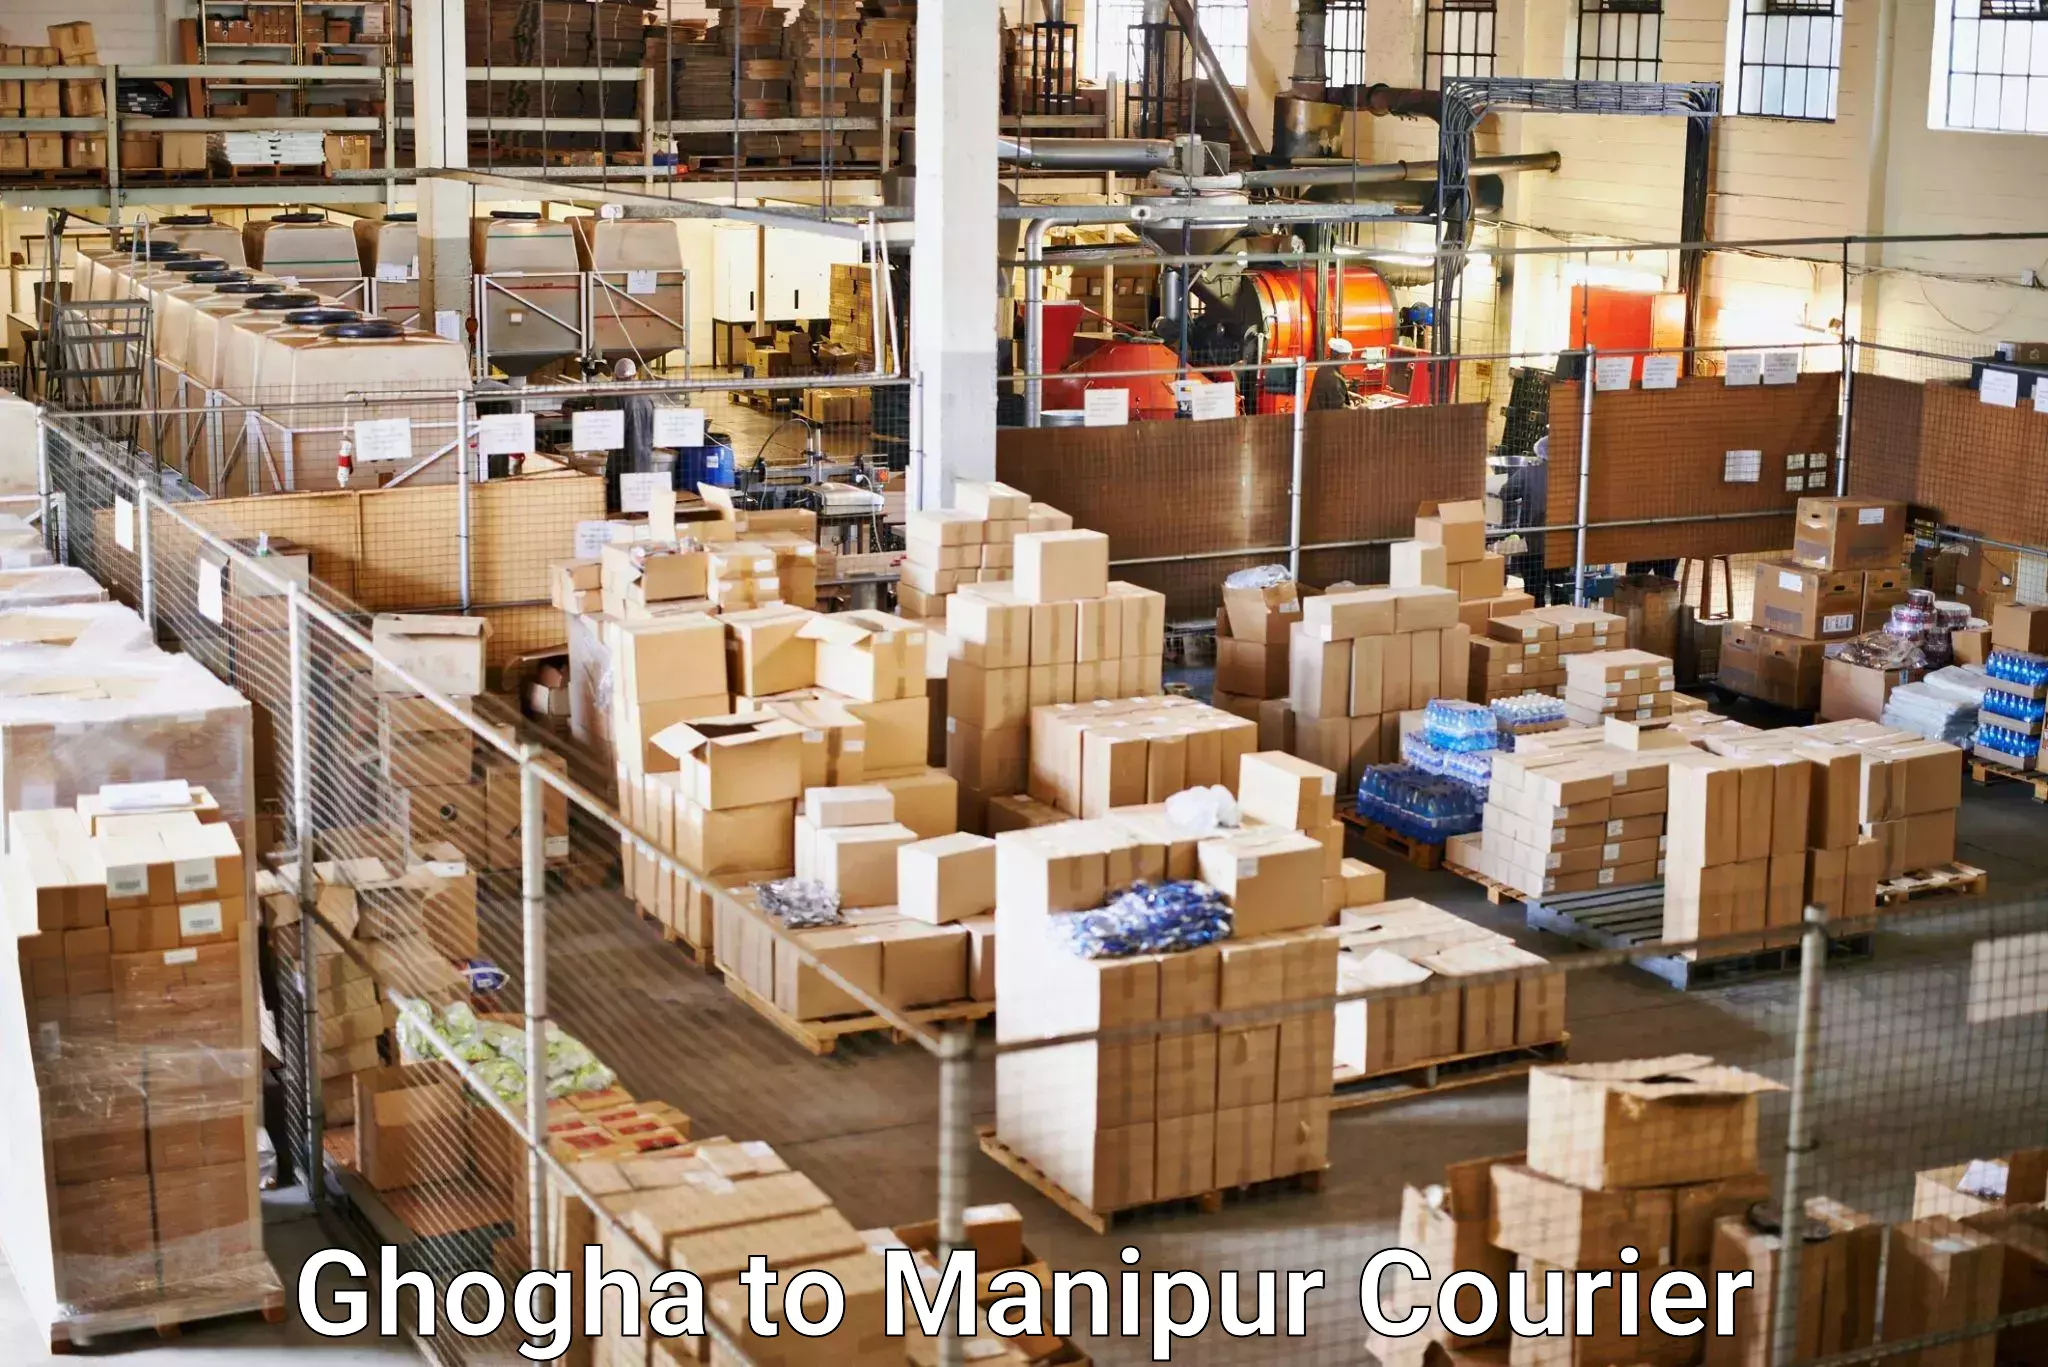 Express delivery network Ghogha to Manipur